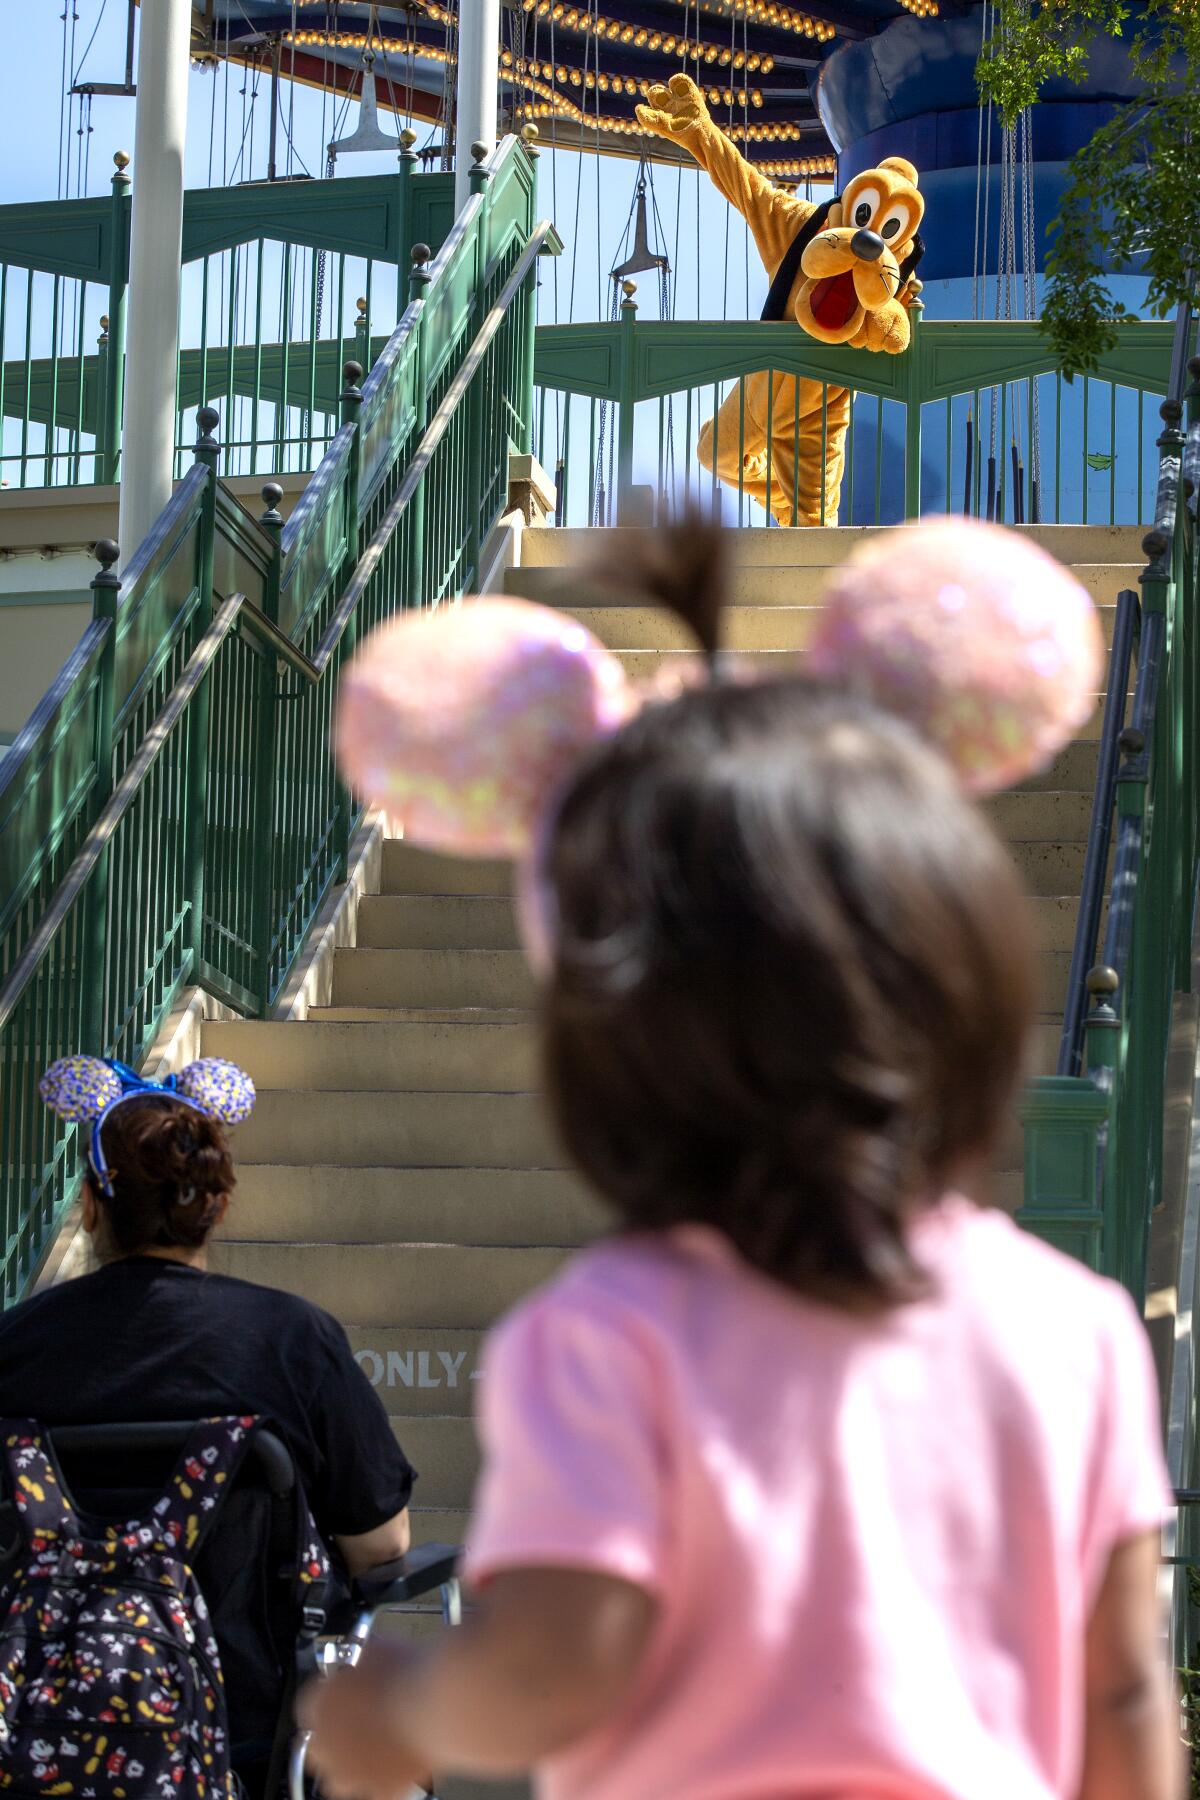 Pluto waves from a great social distance to a young Disney fan. 